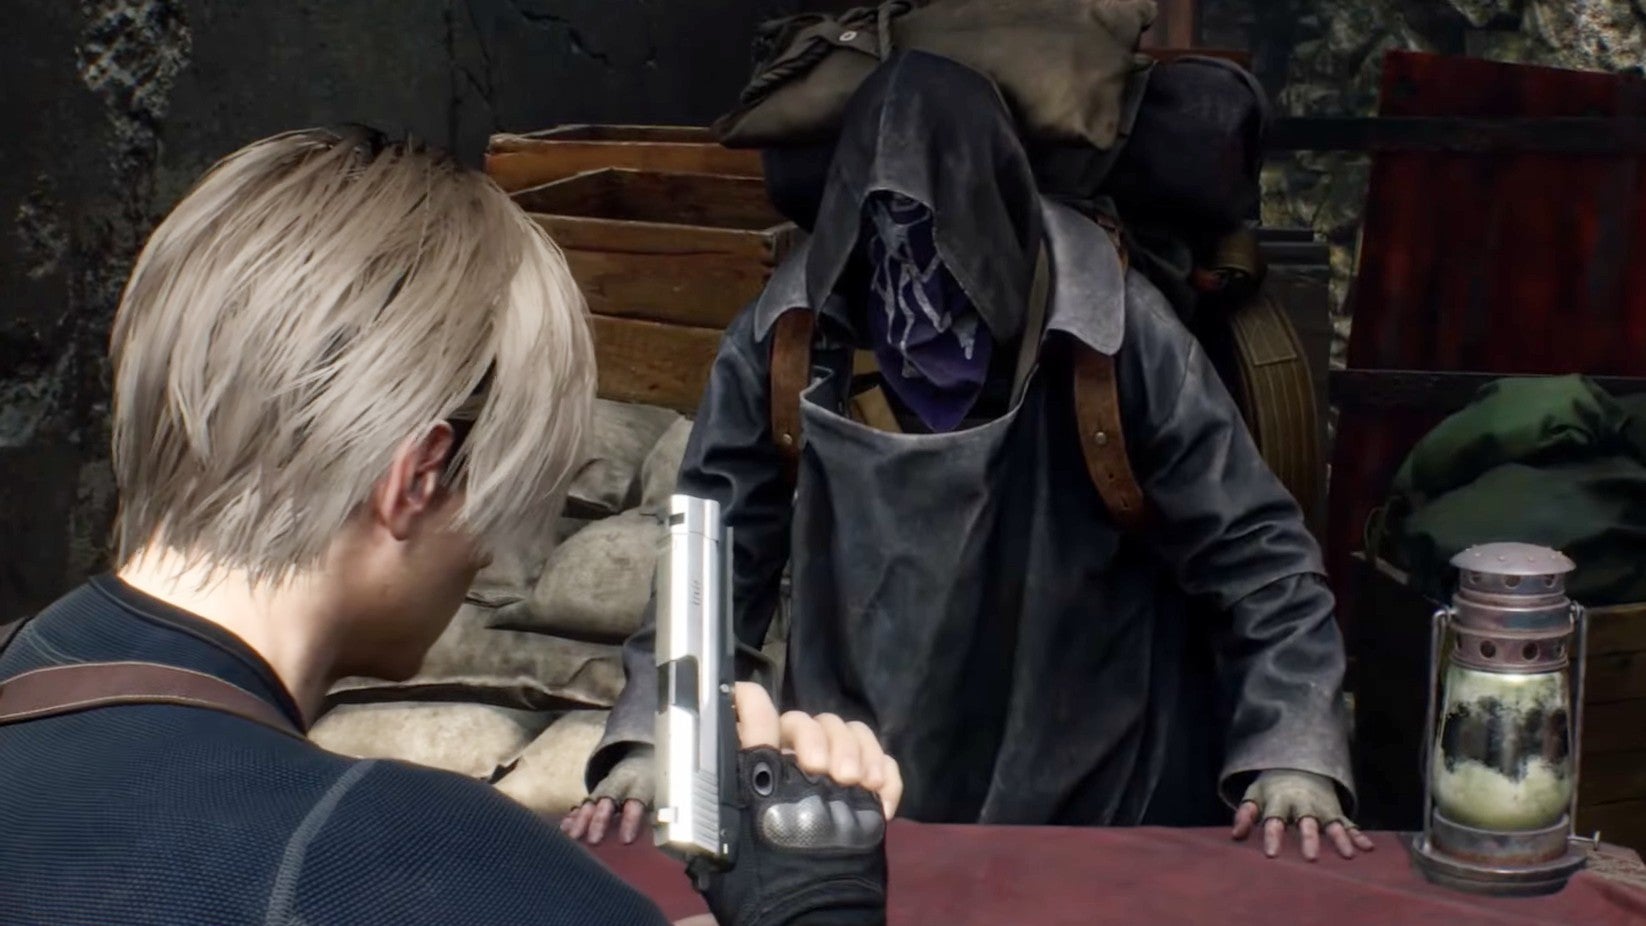 Resident Evil 4 Remake's merchant is hardier than he used to be - Eurogamer.net (Picture 3)